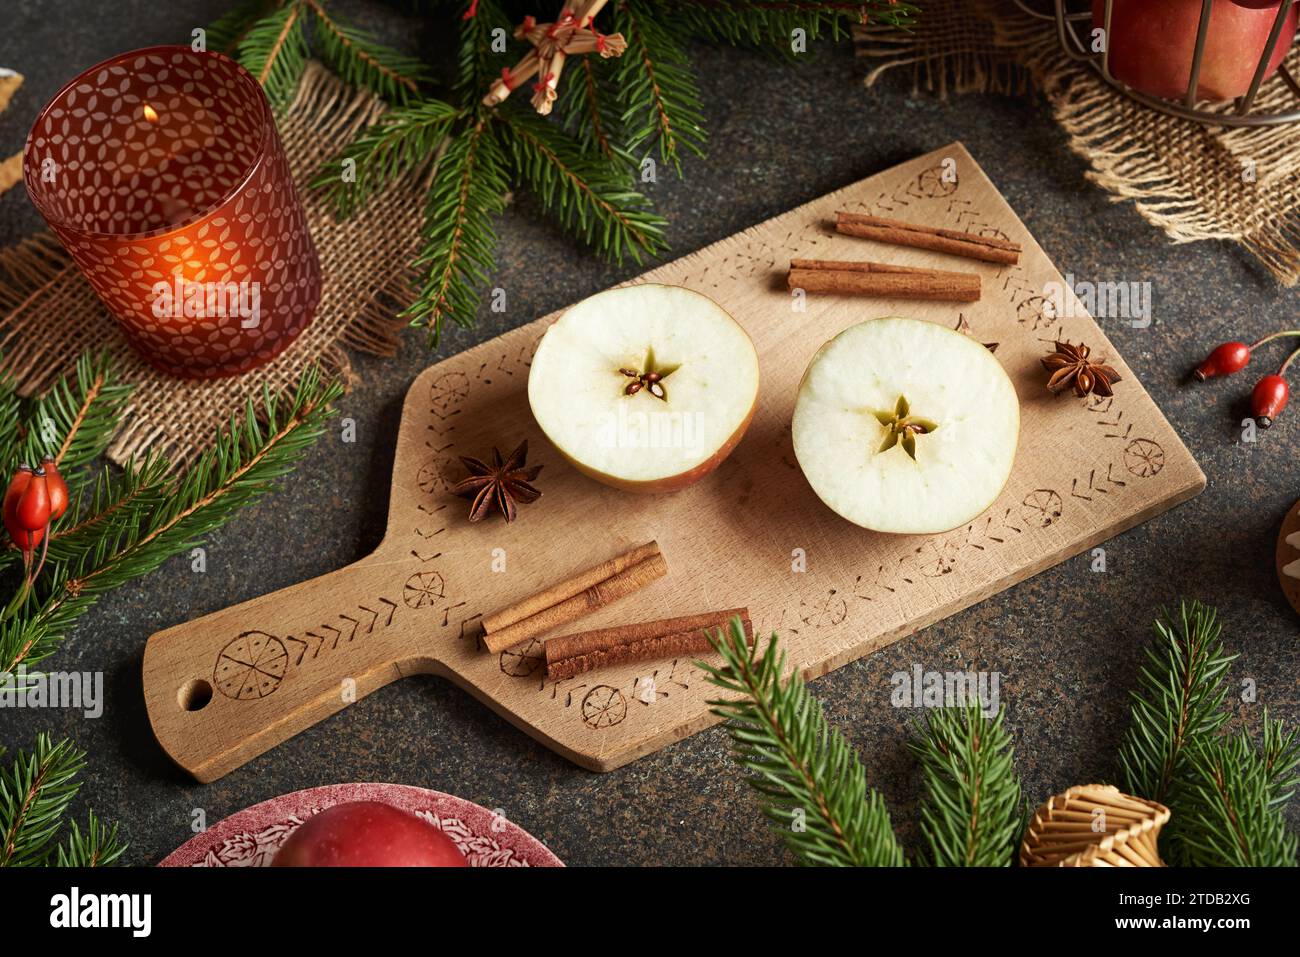 Halved apple with a star in the middle - Christmas symbol Stock Photo